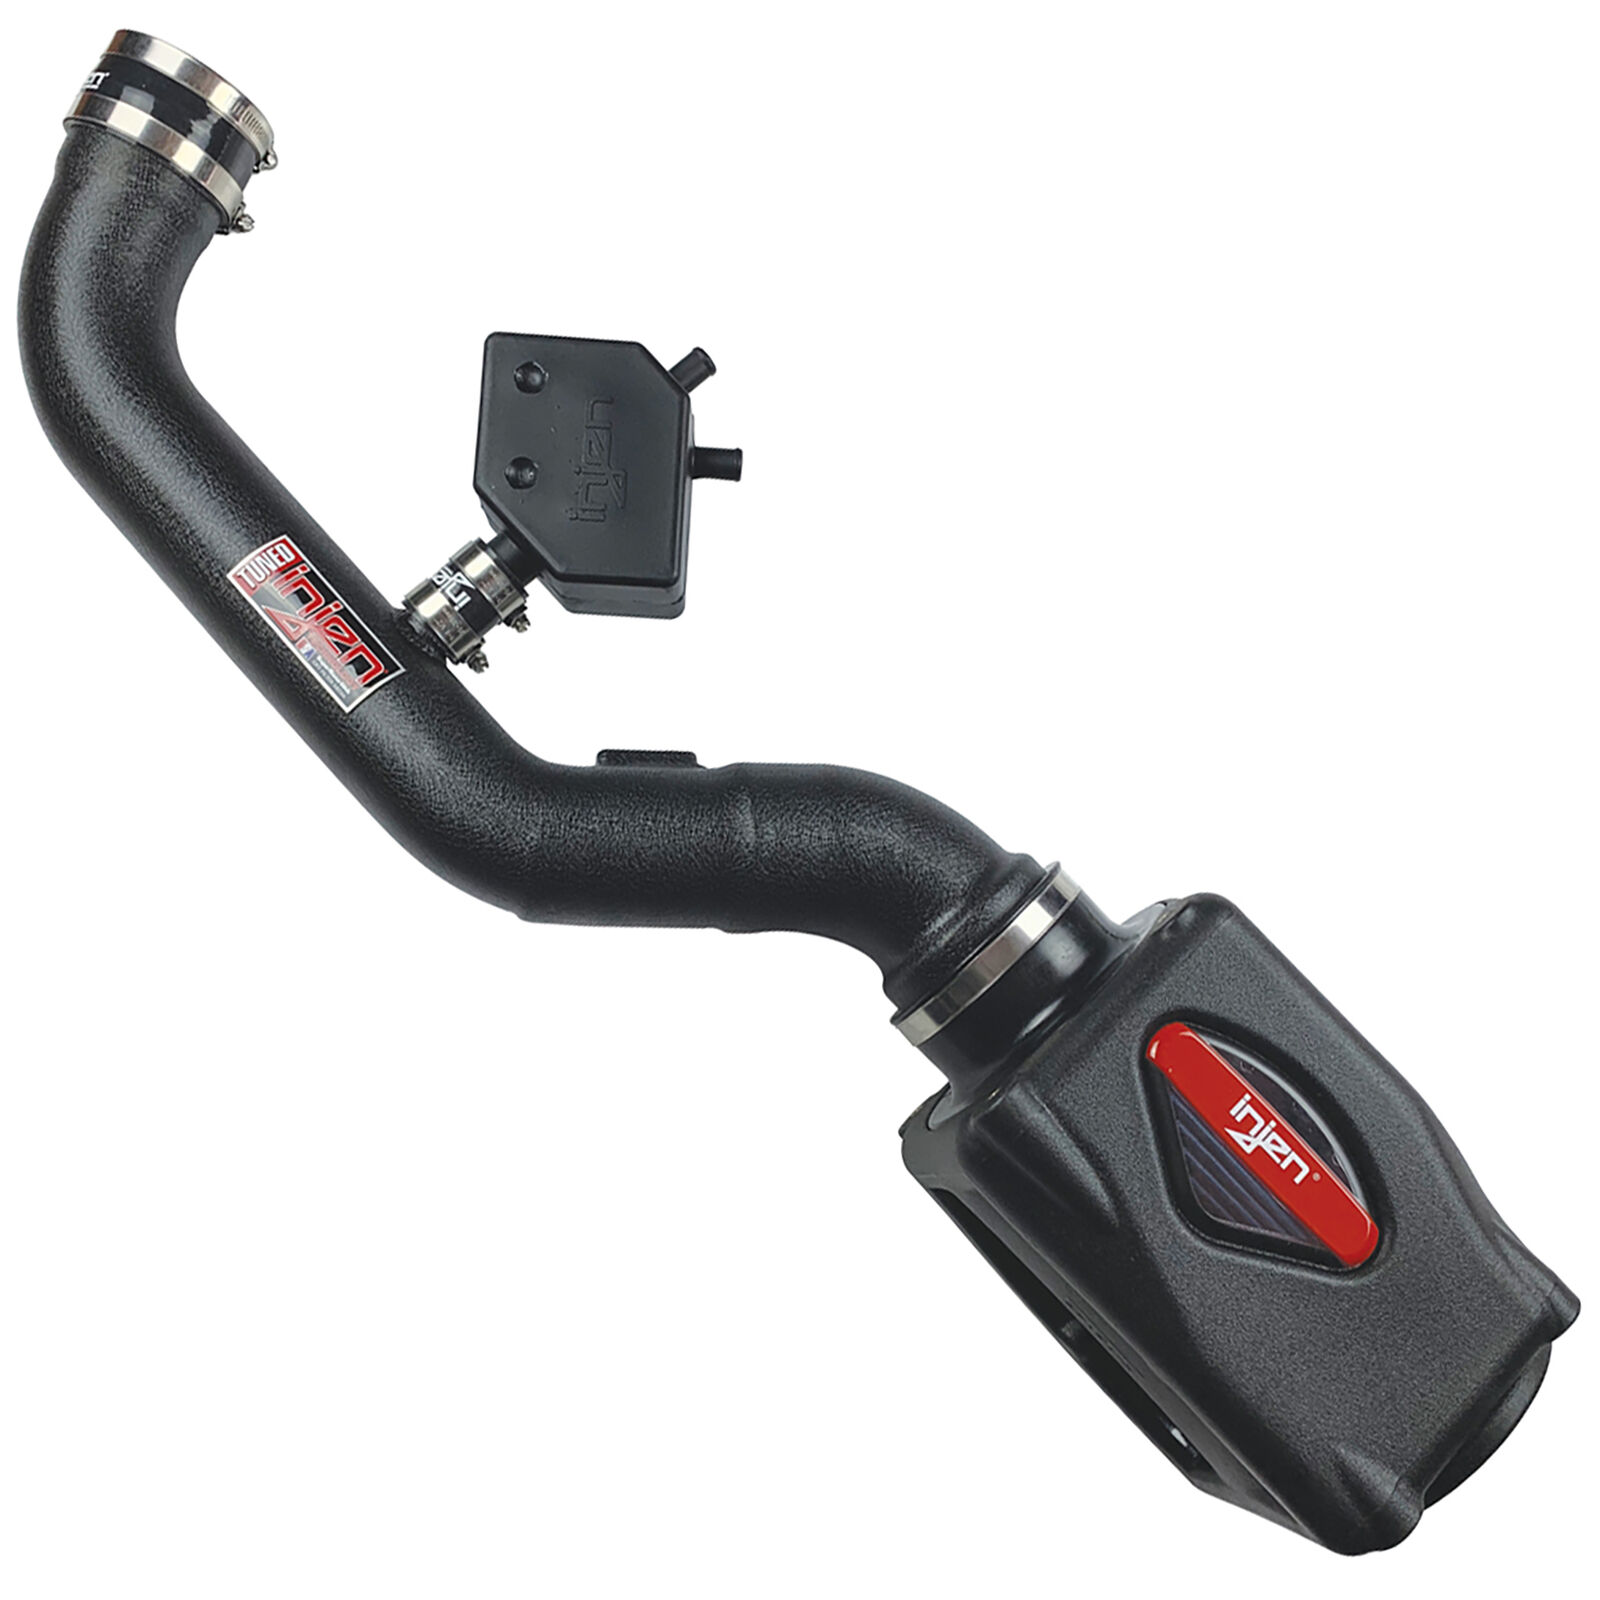 Injen PF1959WB Cold Air Intake for 2005-2019 Nissan Frontier / 05-15 Xterra 4.0L